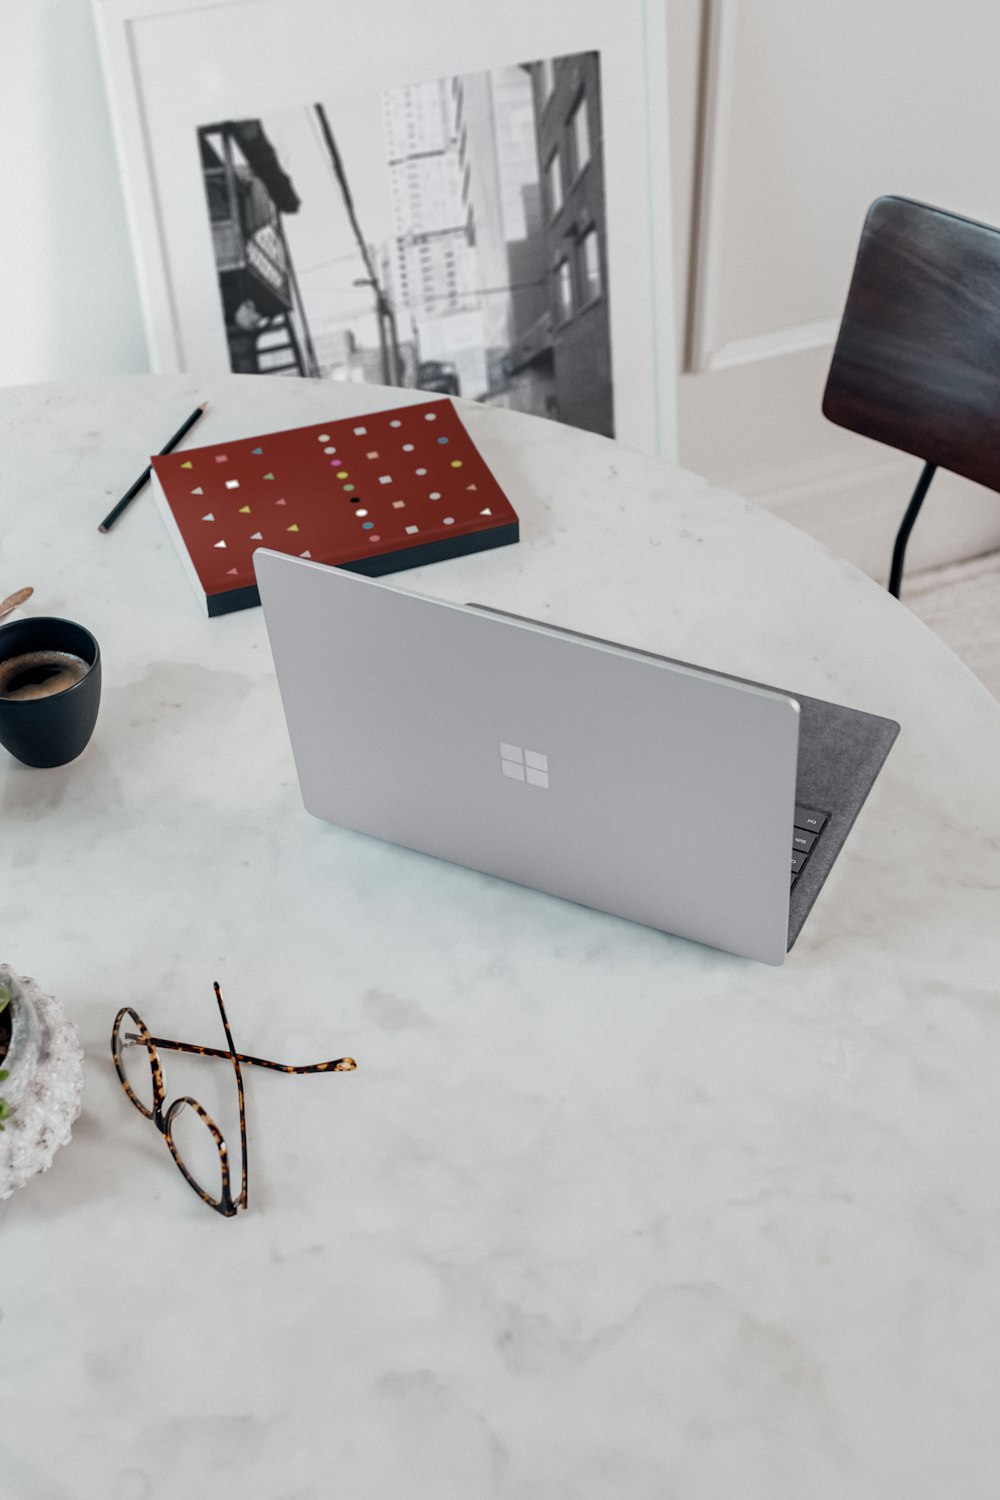 silver microsoft surface laptop computer on white table